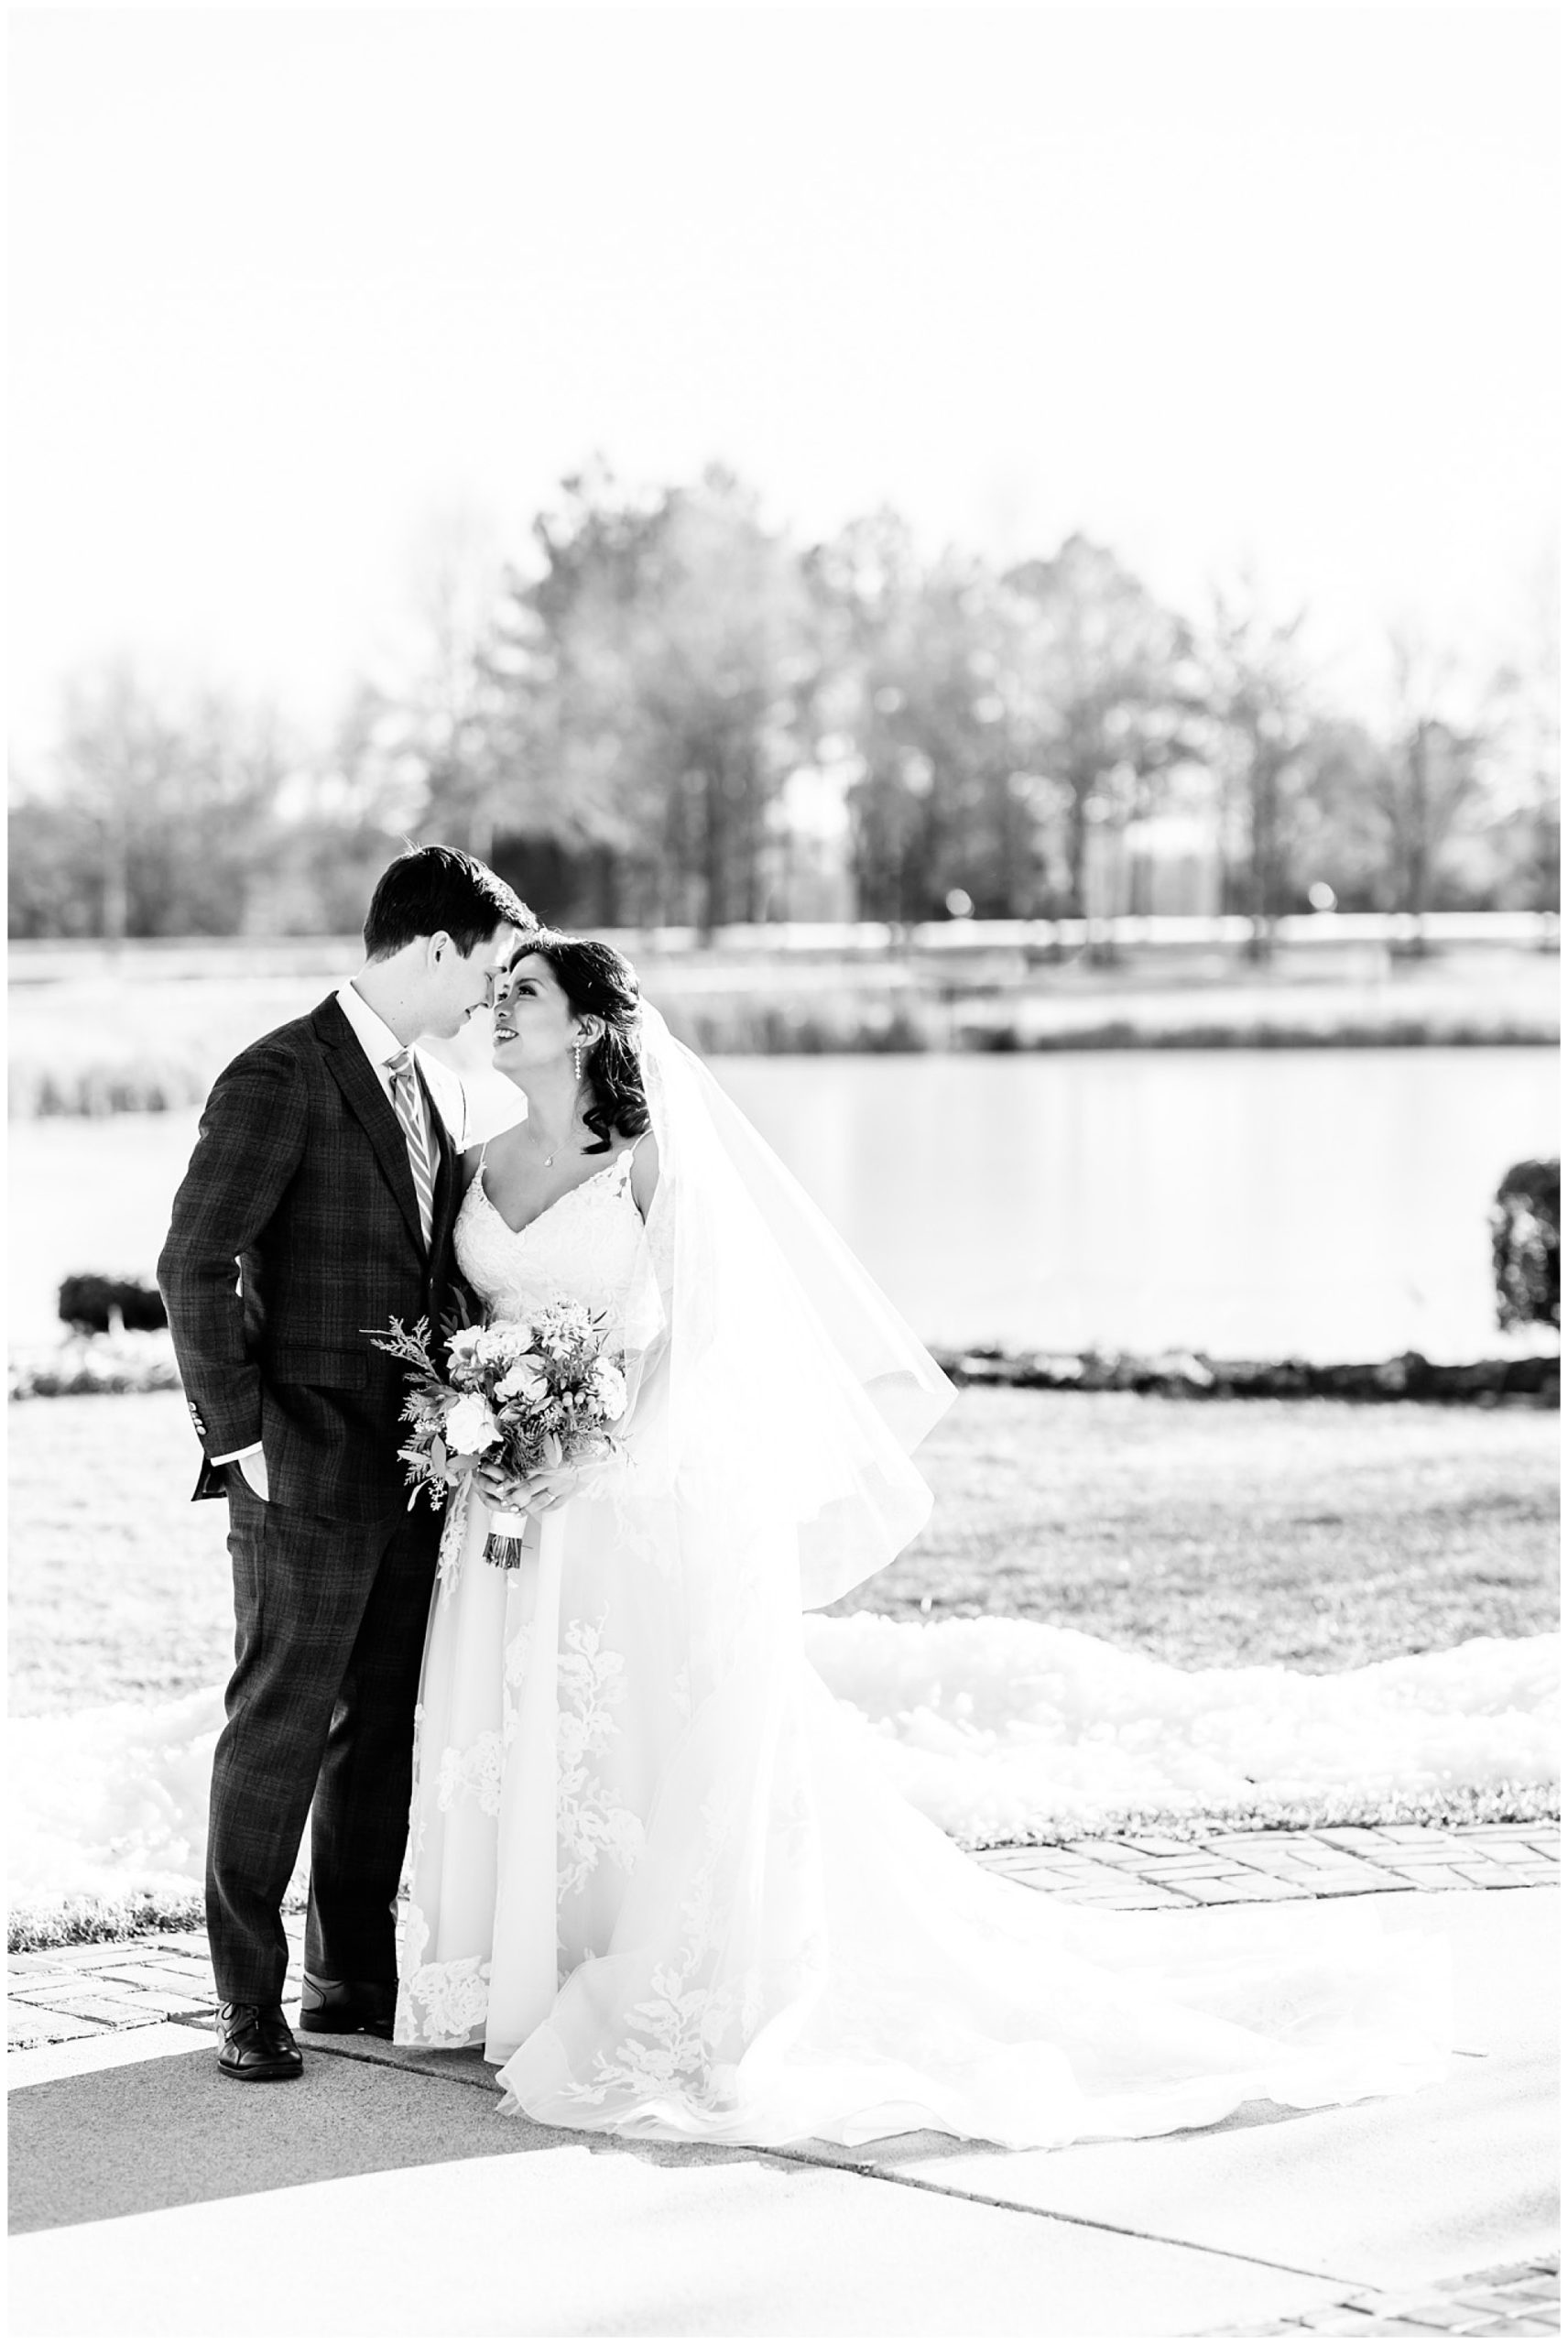 Regency at Dominion Valley wedding, Virginia country club wedding, Haymarket Virginia wedding, northern Virginia wedding, winter wedding, winter wedding aesthetic, DC micro wedding, northern Virginia wedding venues, classic winter wedding, Rachel E.H. Photography, black and white, bride and groom almost kissing